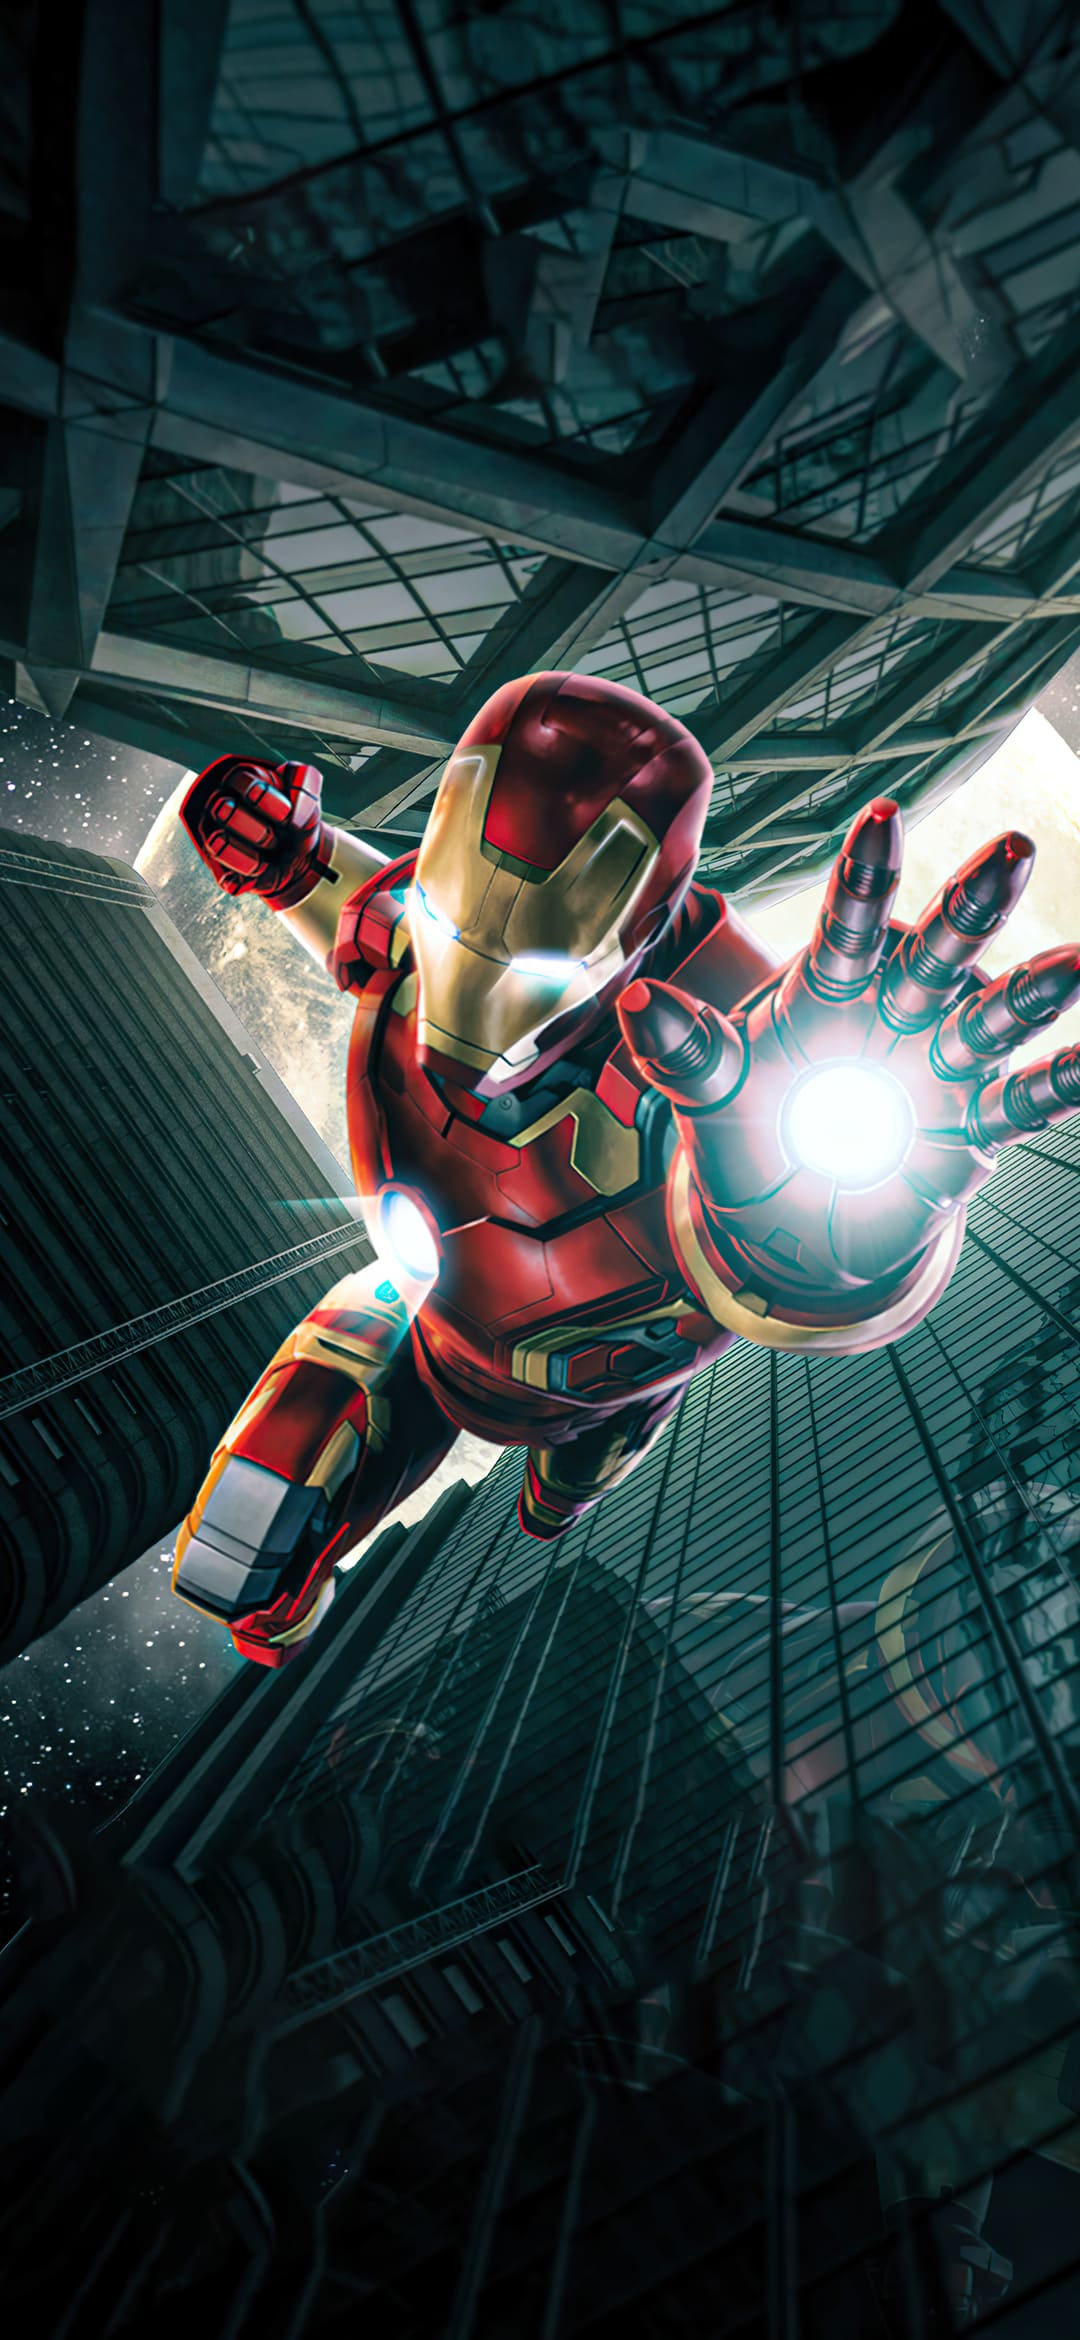 Cool Iron Man iPhone Wallpapers -Top 25 Best Cool Iron Man iPhone Wallpapers  - Getty Wallpapers